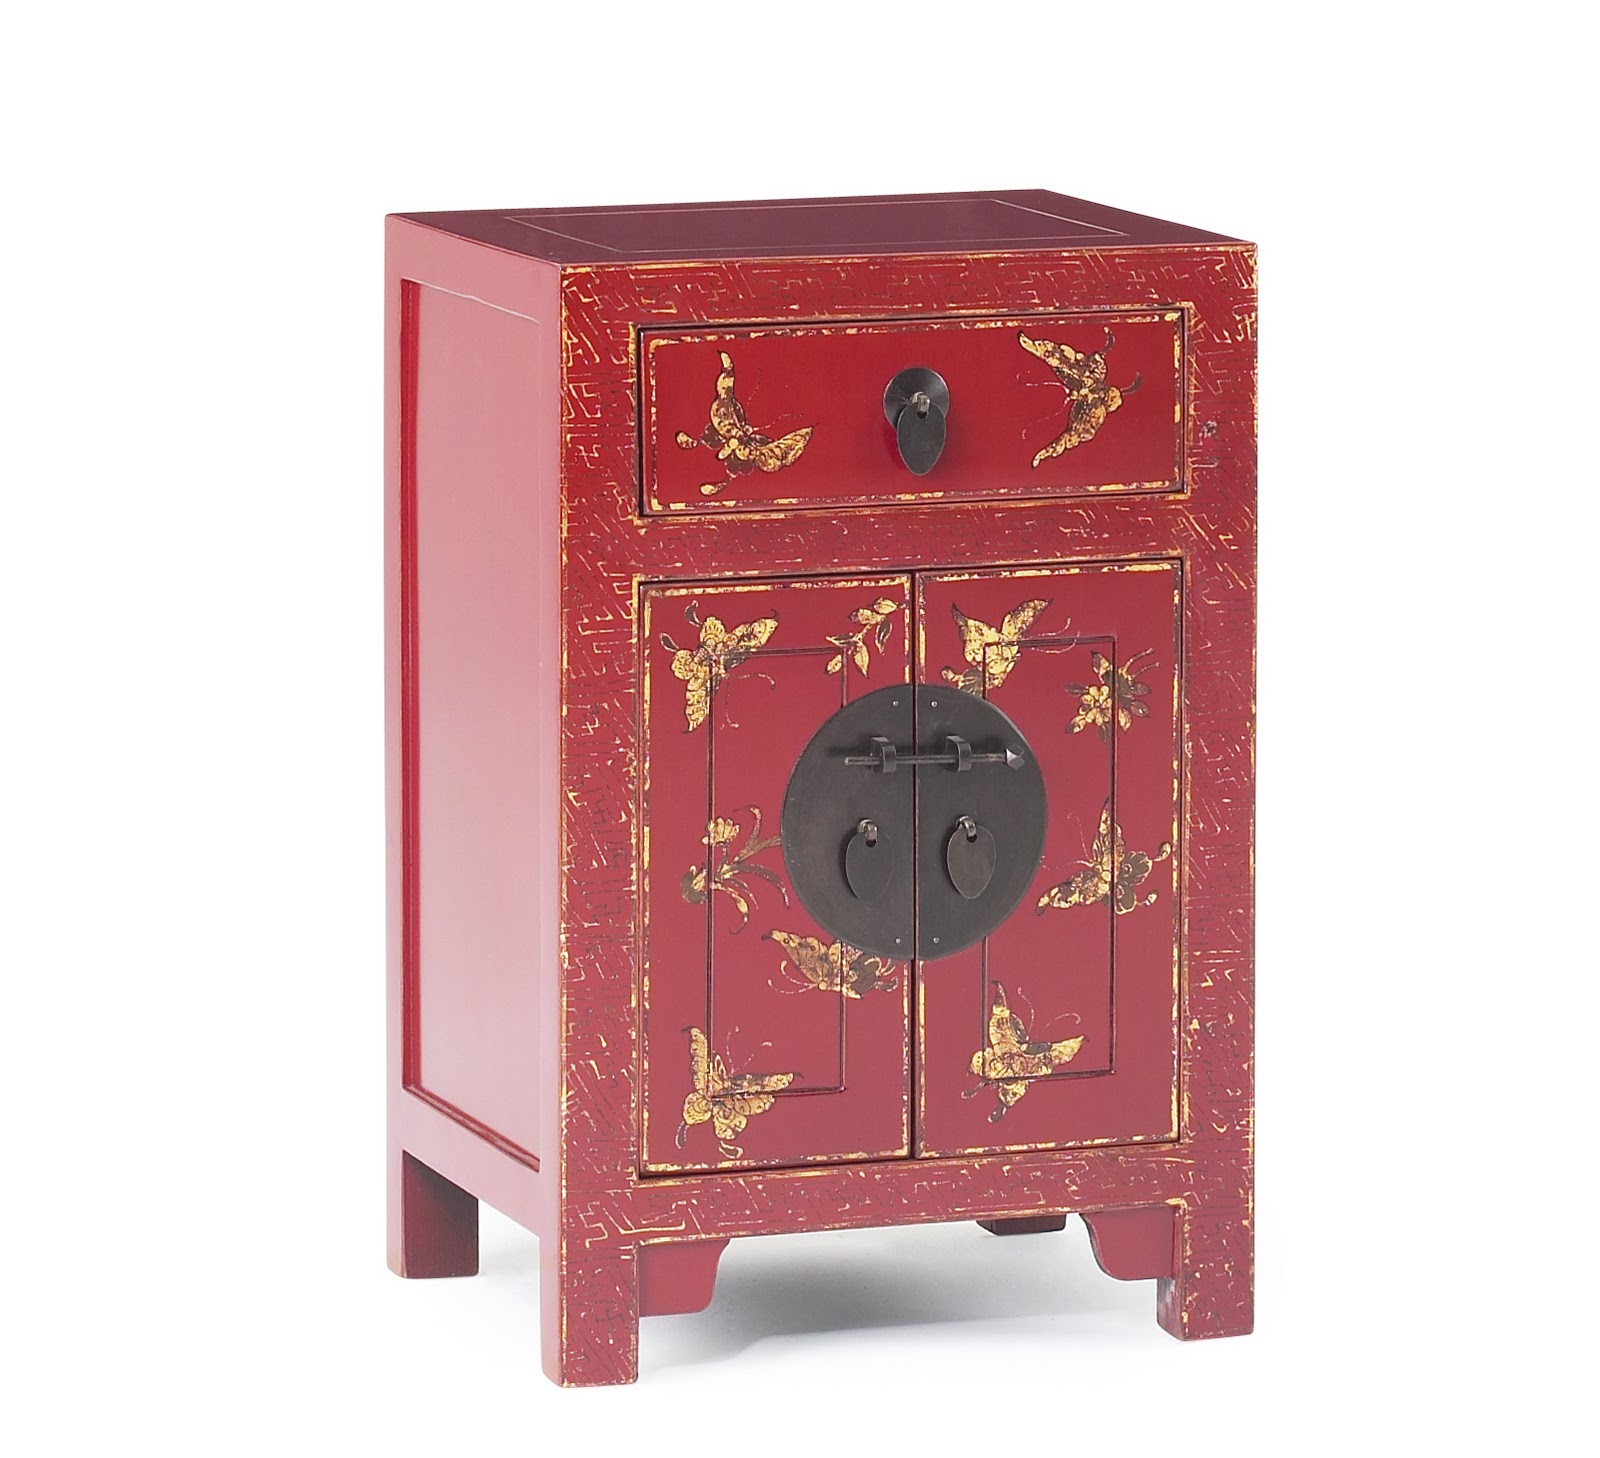 http://1.bp.blogspot.com/-0P70emkEevw/TWKEdWRvmAI/AAAAAAAAAW4/hlgYxa9oV4w/s1600/Interiors+Chinese+-+Chinoiserie+Red+Lacquer+Hand+Painted+Bedside+Cabinet+from+Supatra.jpg